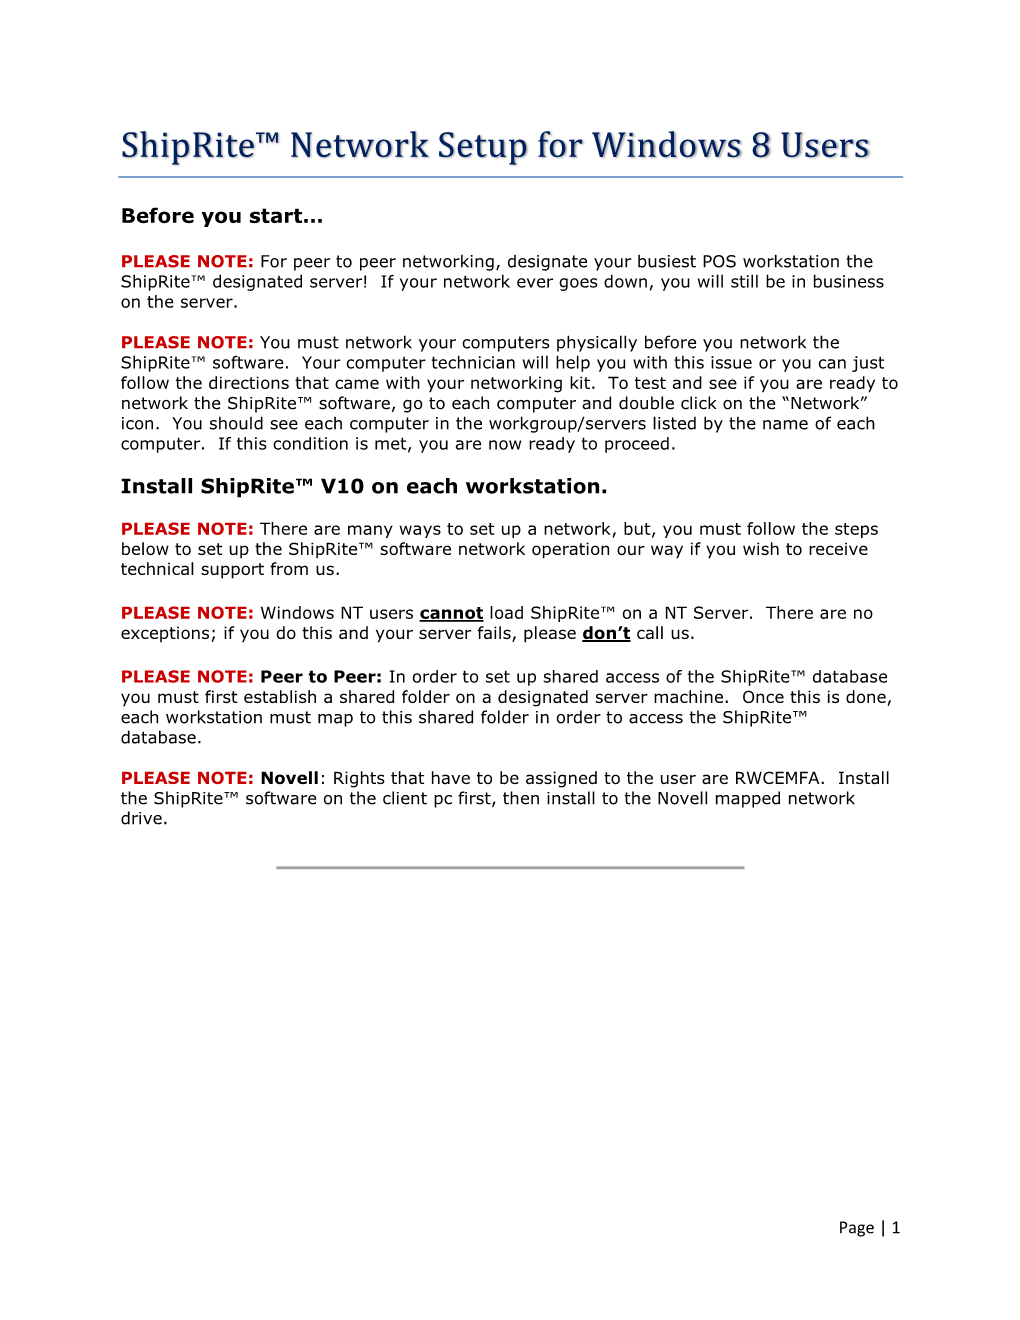 Networking Instructions for Windows 8 and 8.1 –